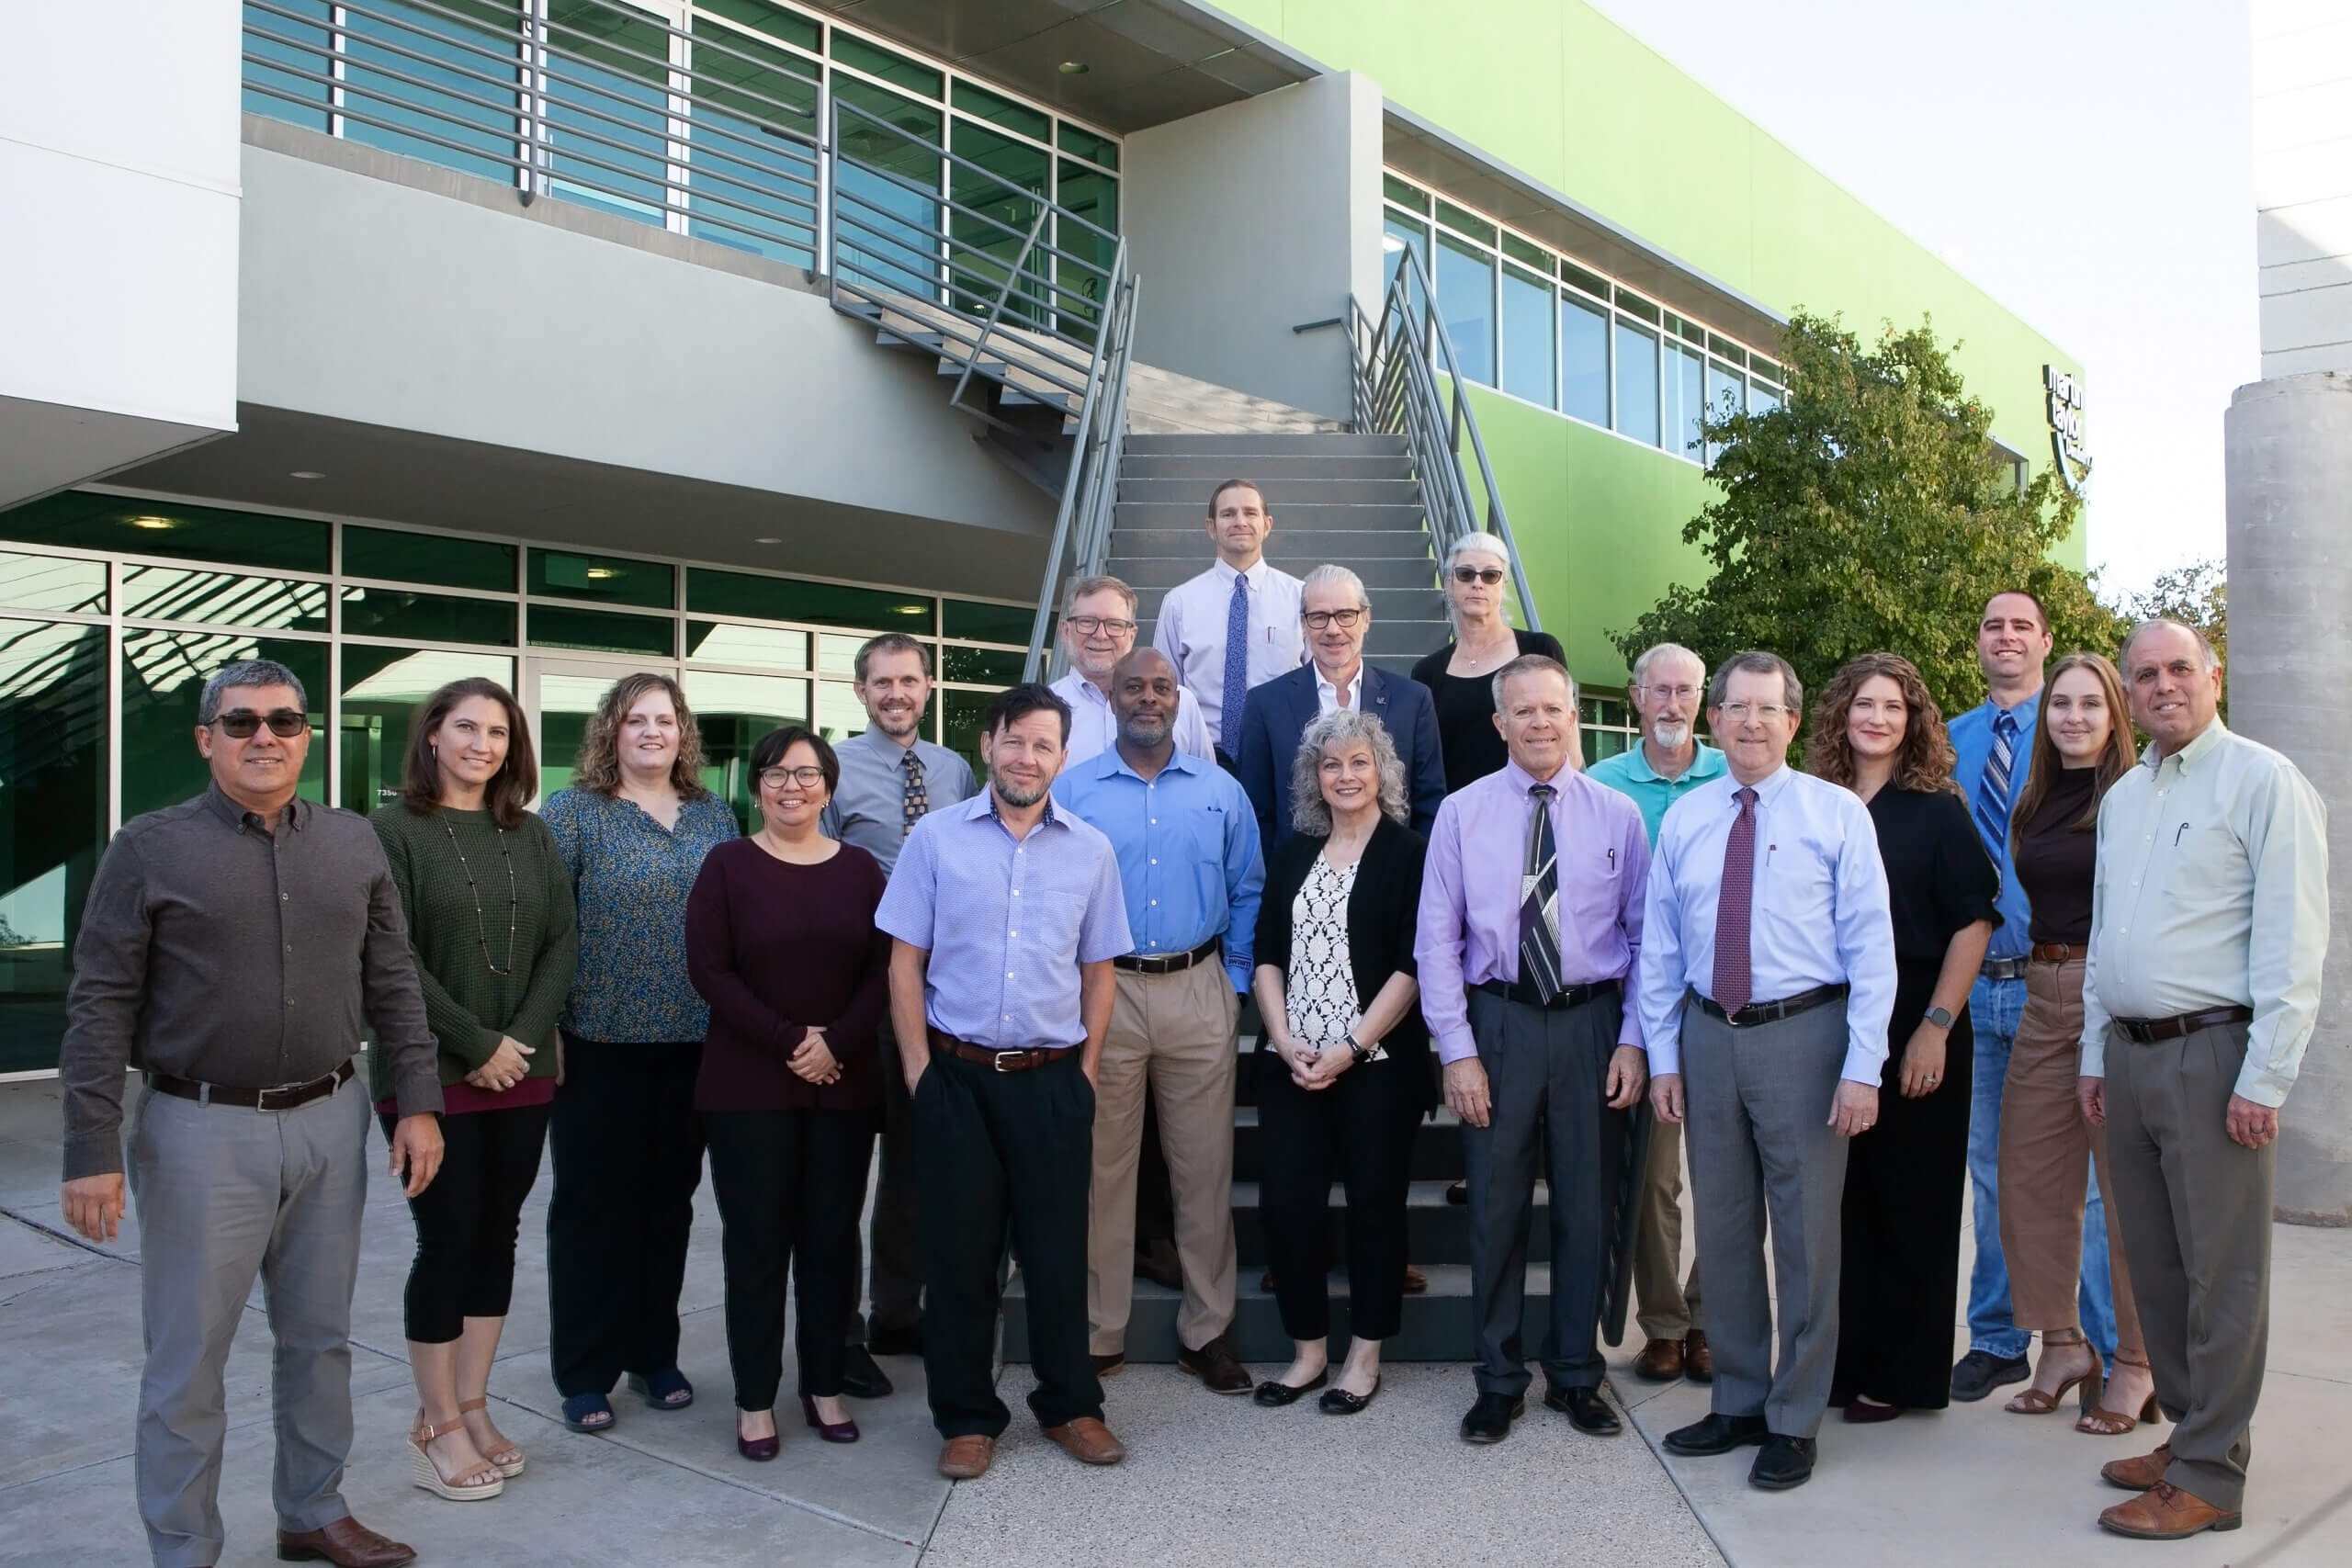 A large team of architects that specialize in architectural design standing in front of the Swaim Associates office